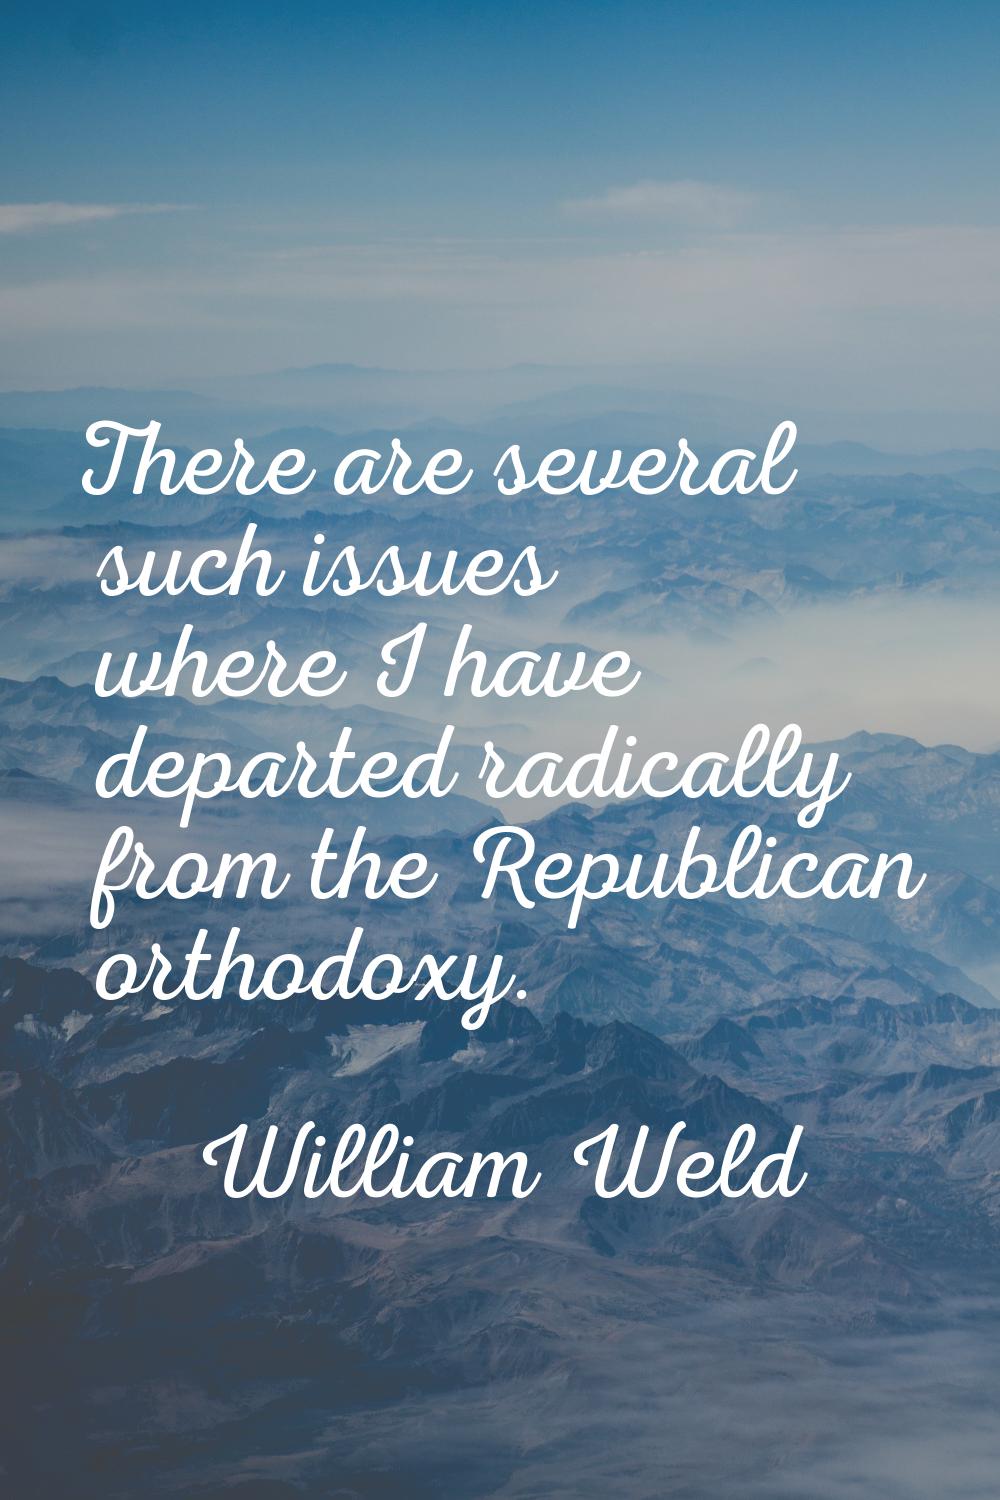 There are several such issues where I have departed radically from the Republican orthodoxy.